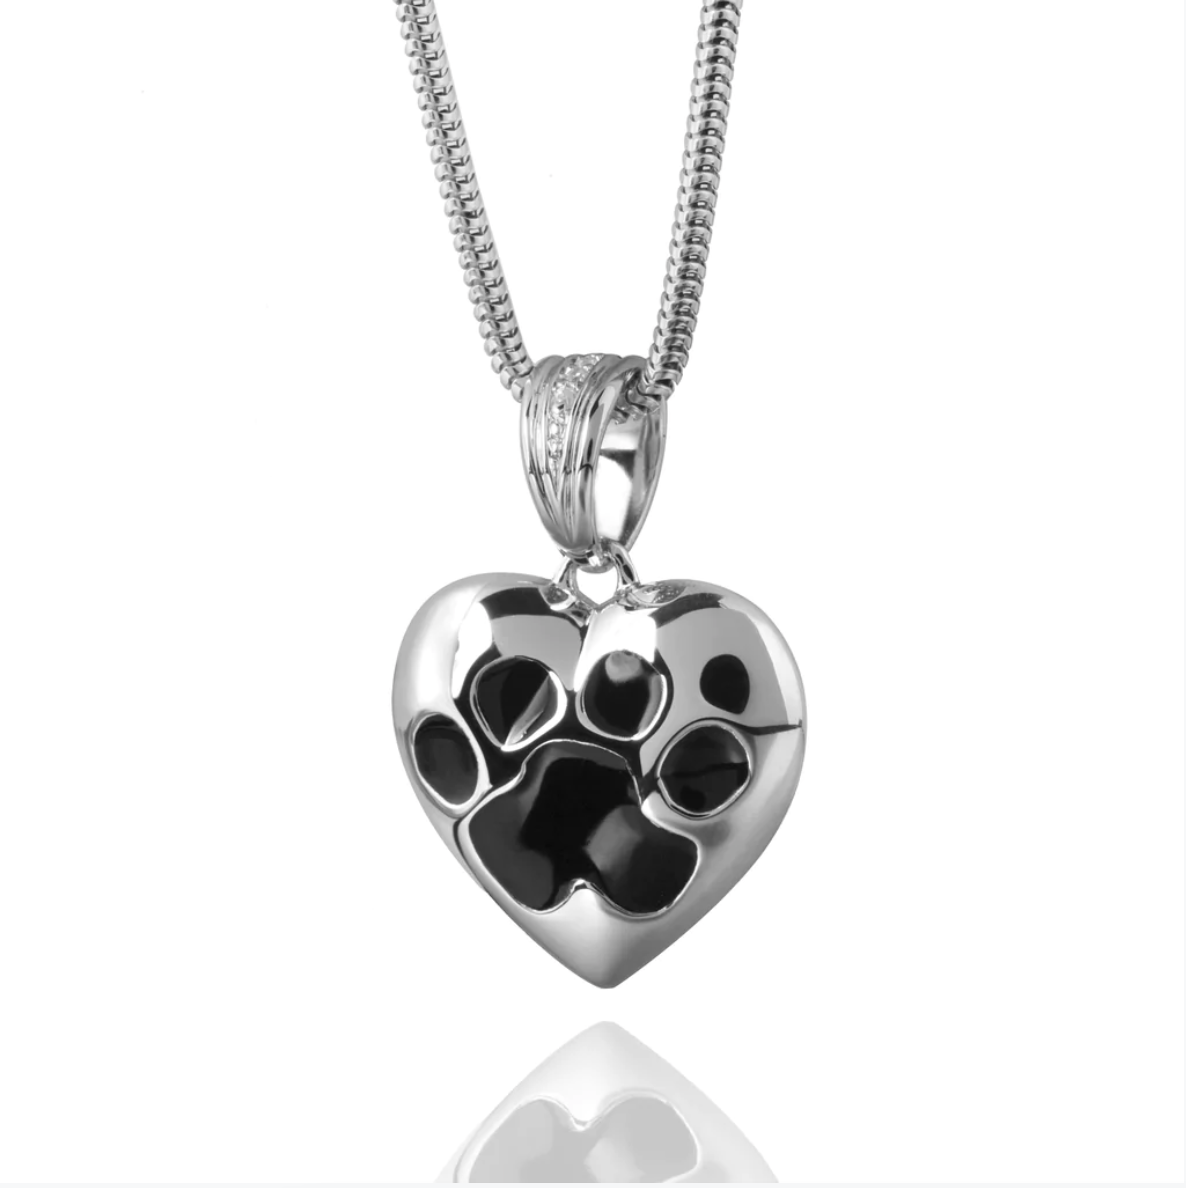 Puppy Dog Paw Print Pendant – Heart and Soul Jewelry